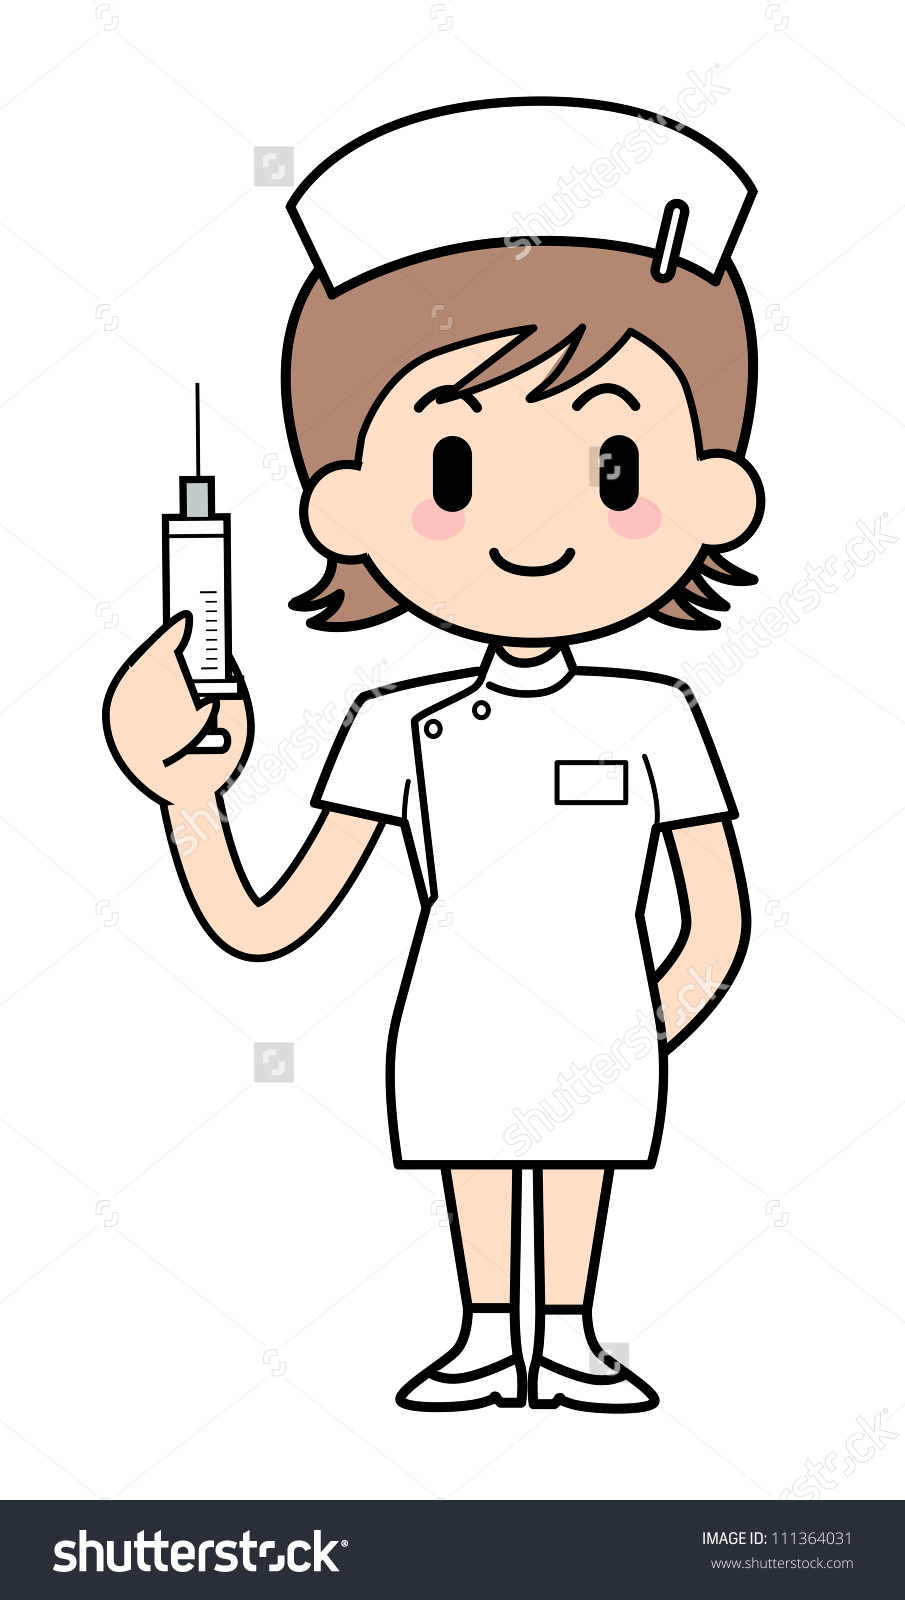 Clipart Of Nurse Injection Clipground